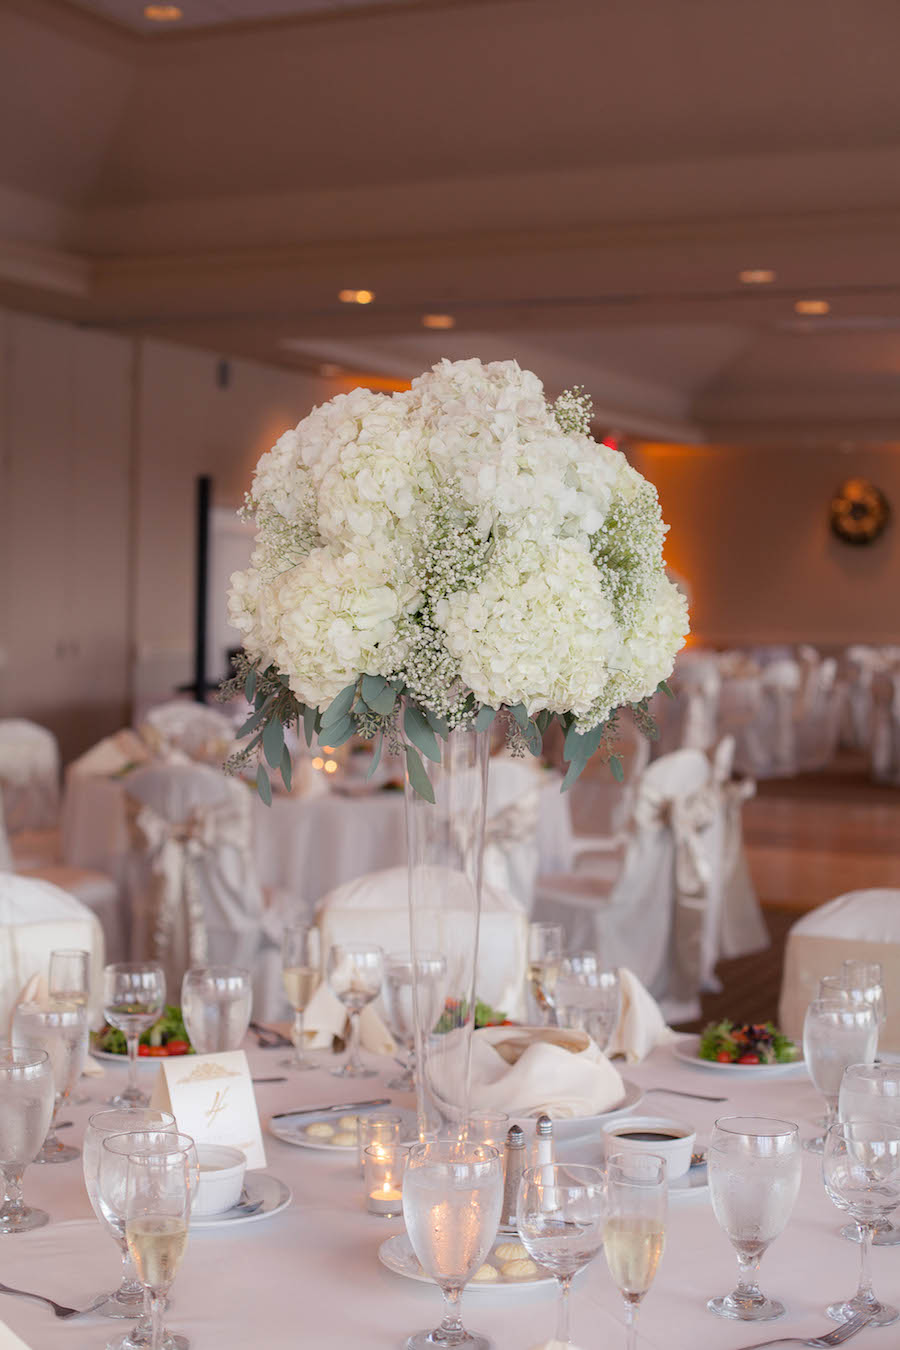 Tall White Hydrangea and Baby’s Breath Wedding Centerpiece Flowers in Clear Vase | White and Ivory Wedding | Tampa Wedding Floral Designer Northside Florist